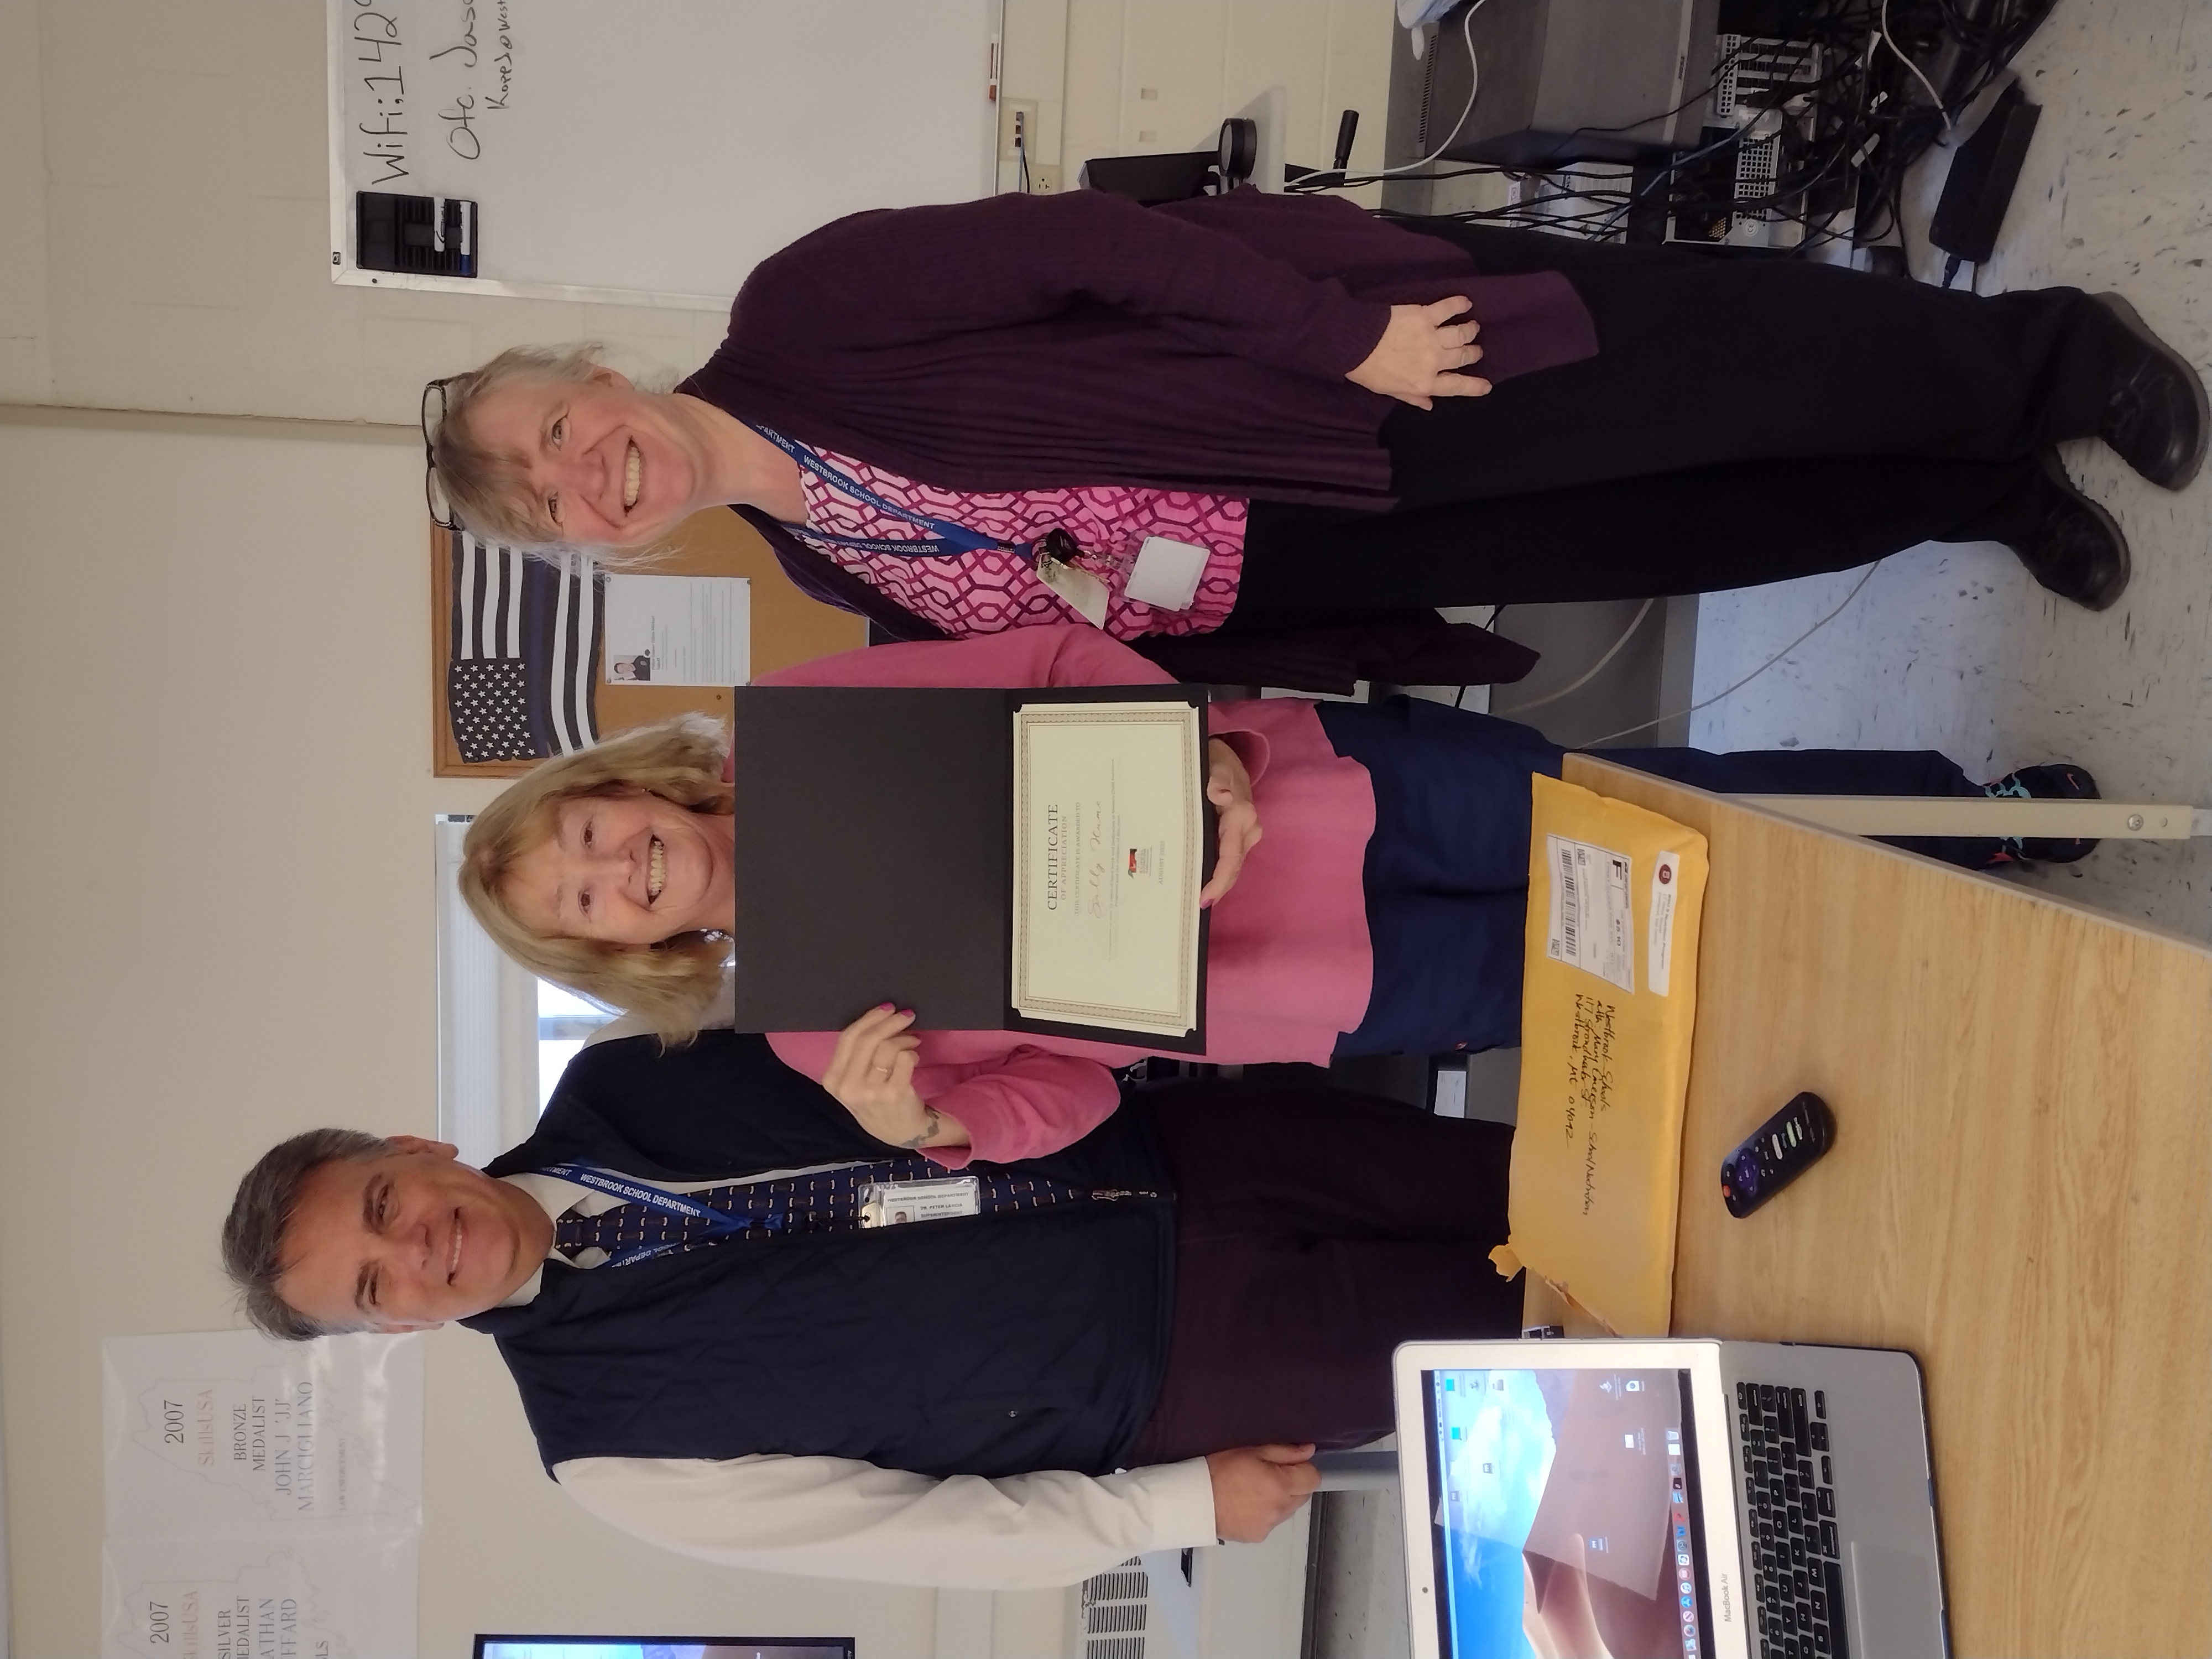 Dr. Lancia presenting 25 years of service to Sally Hume